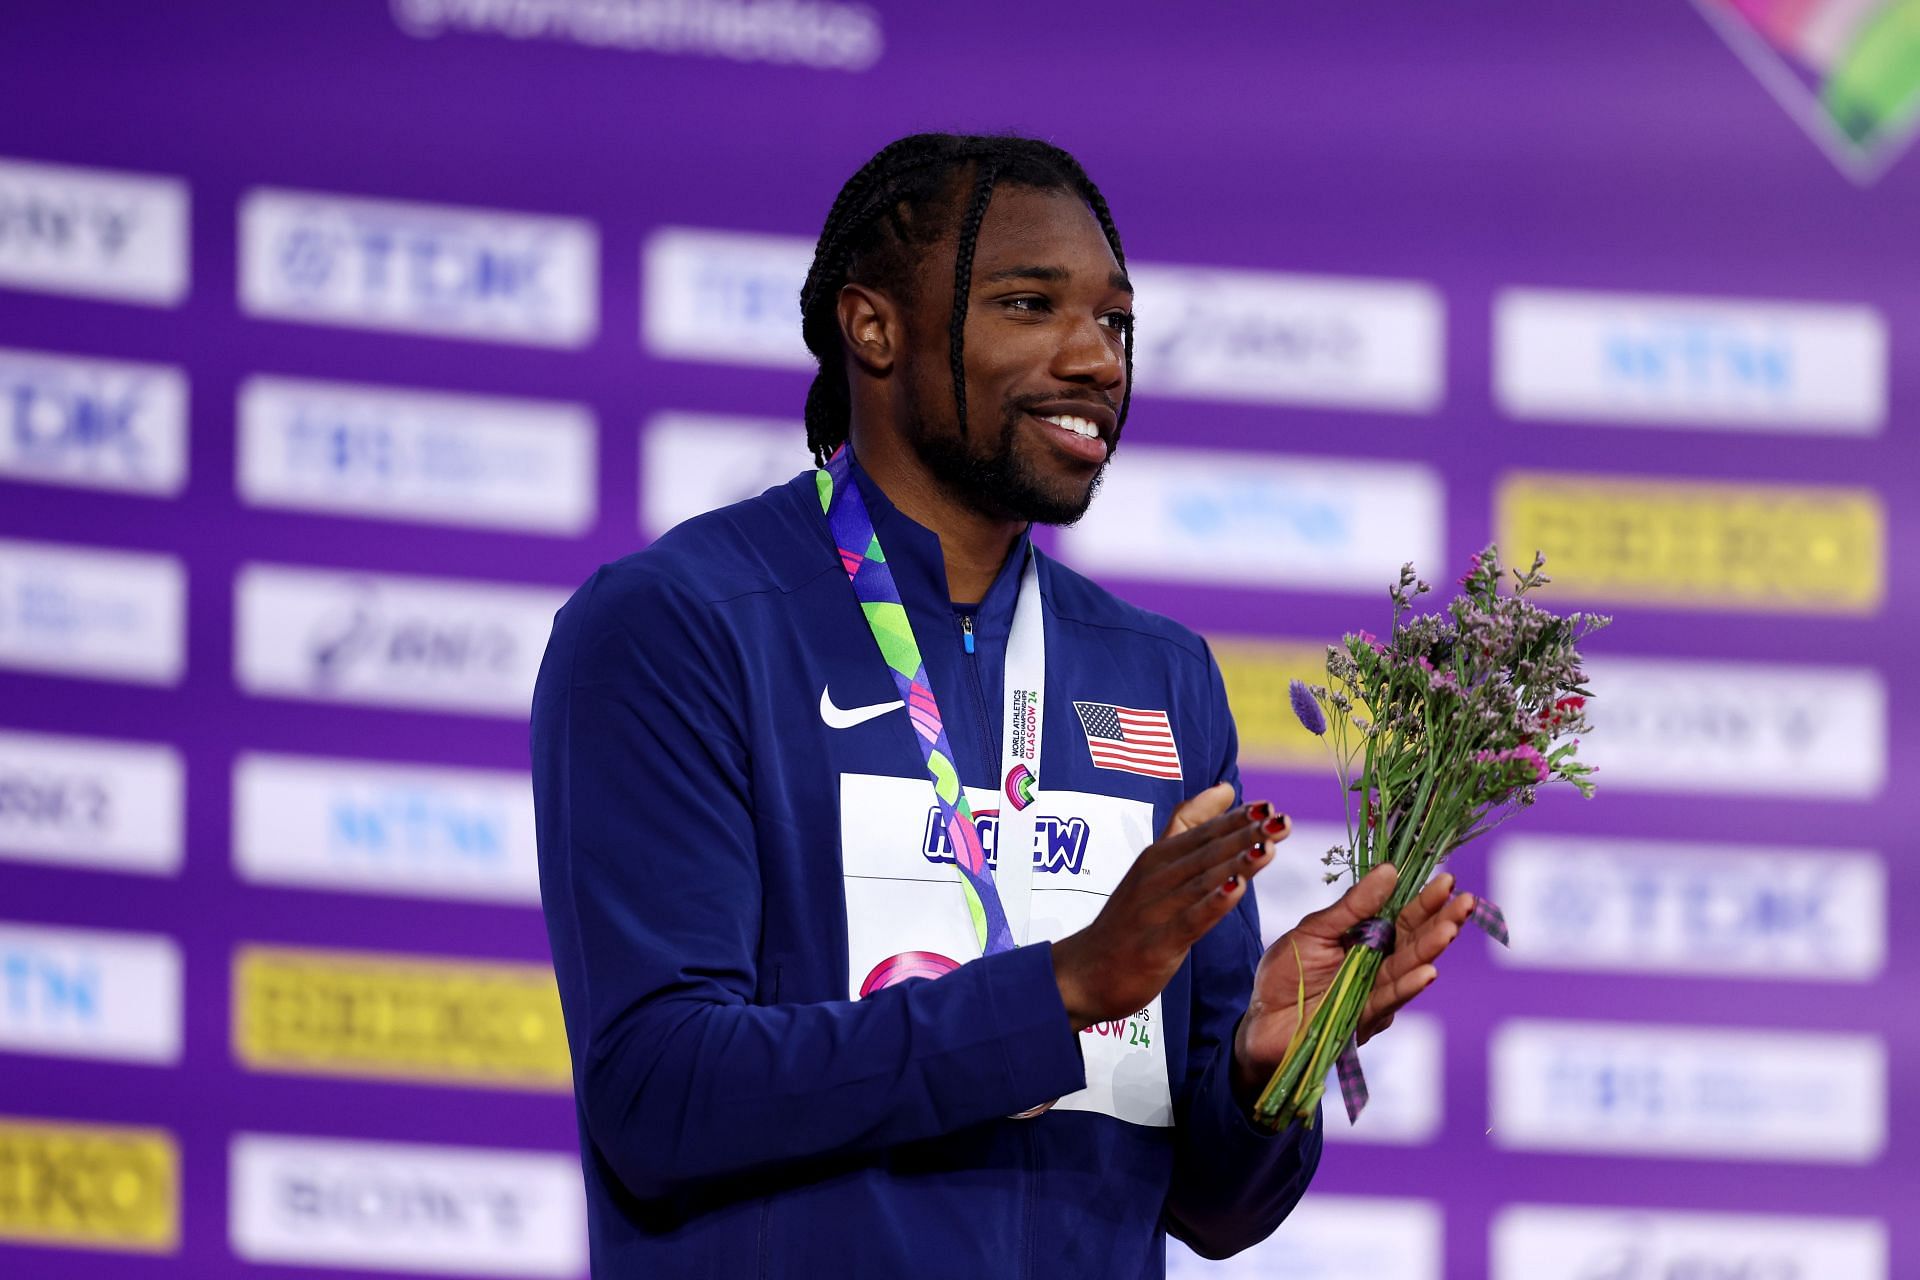 Noah Lyles during the medal ceremony for the Men&#039;s 60 Metres Final at the World Athletics Indoor Championships in Glasgow, Scotland.